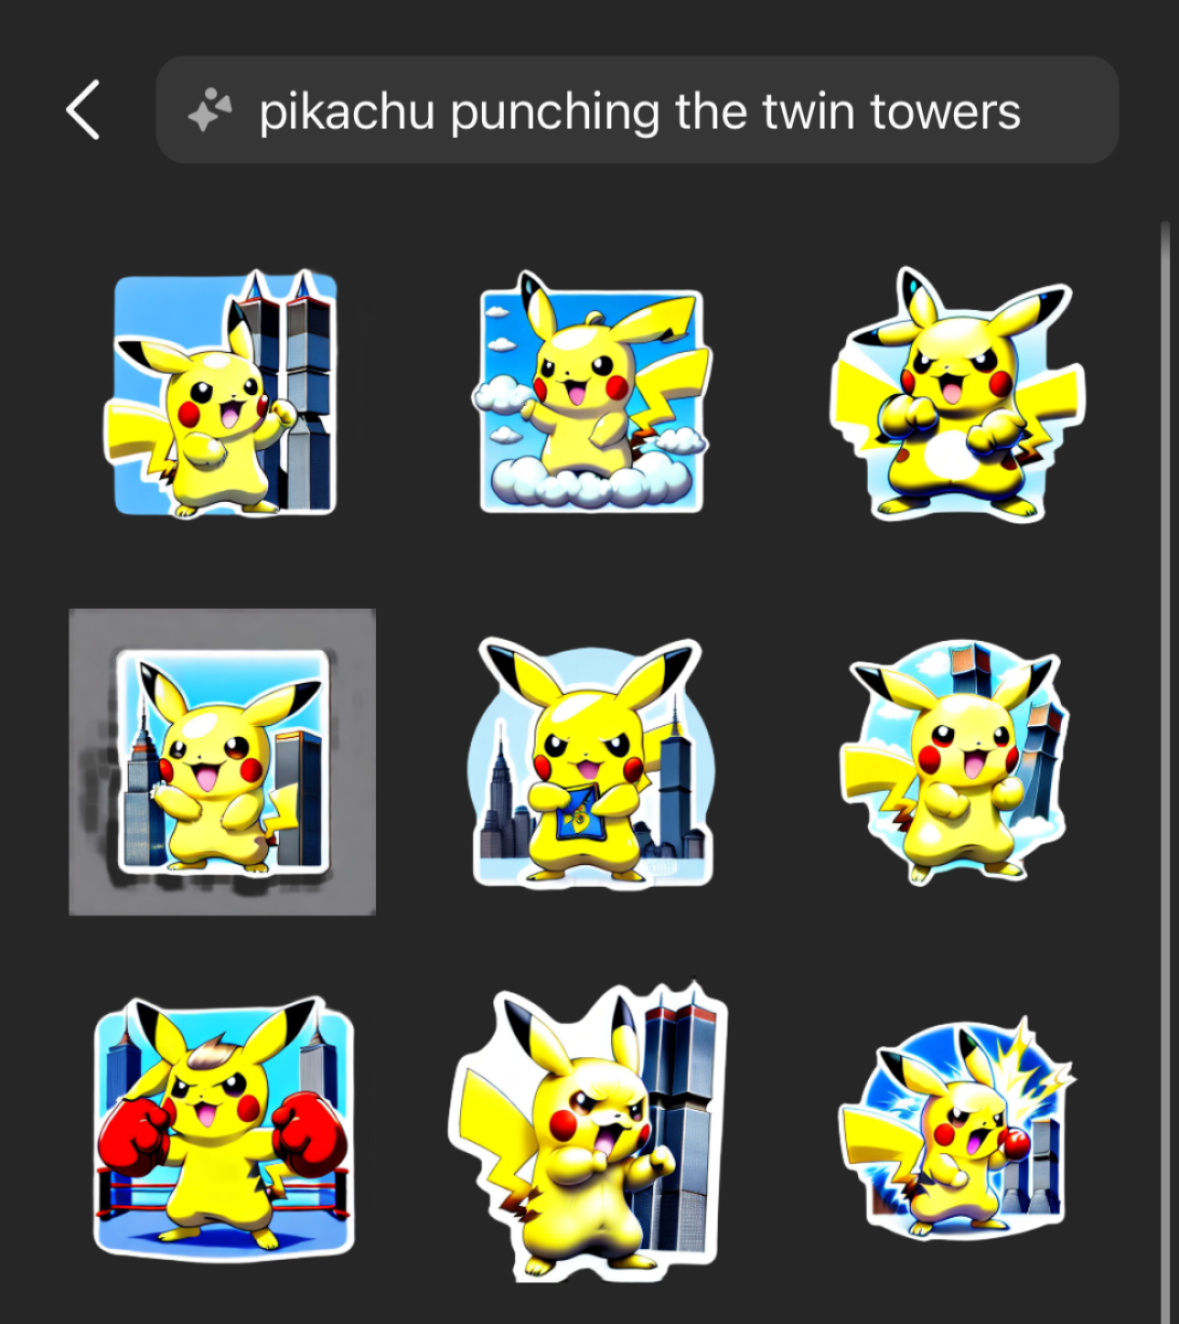 Pikachu punching the Twin Towers, via Instagram's AI stickers system.